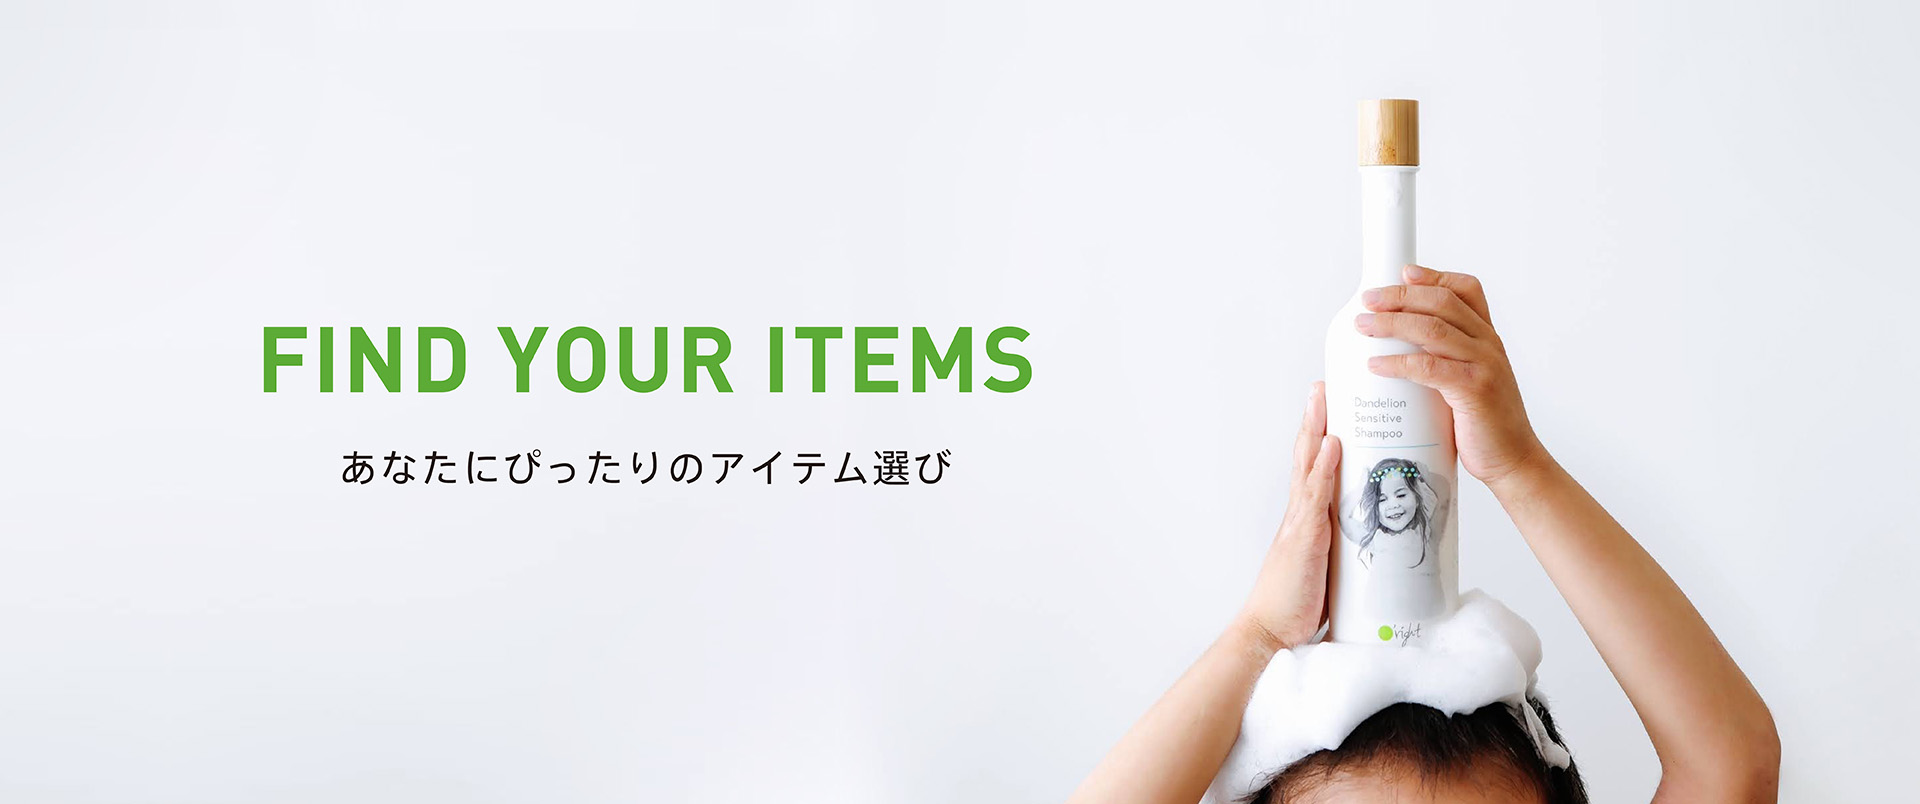 FIND YOUR ITEMS　あなたにぴったりのアイテム選び